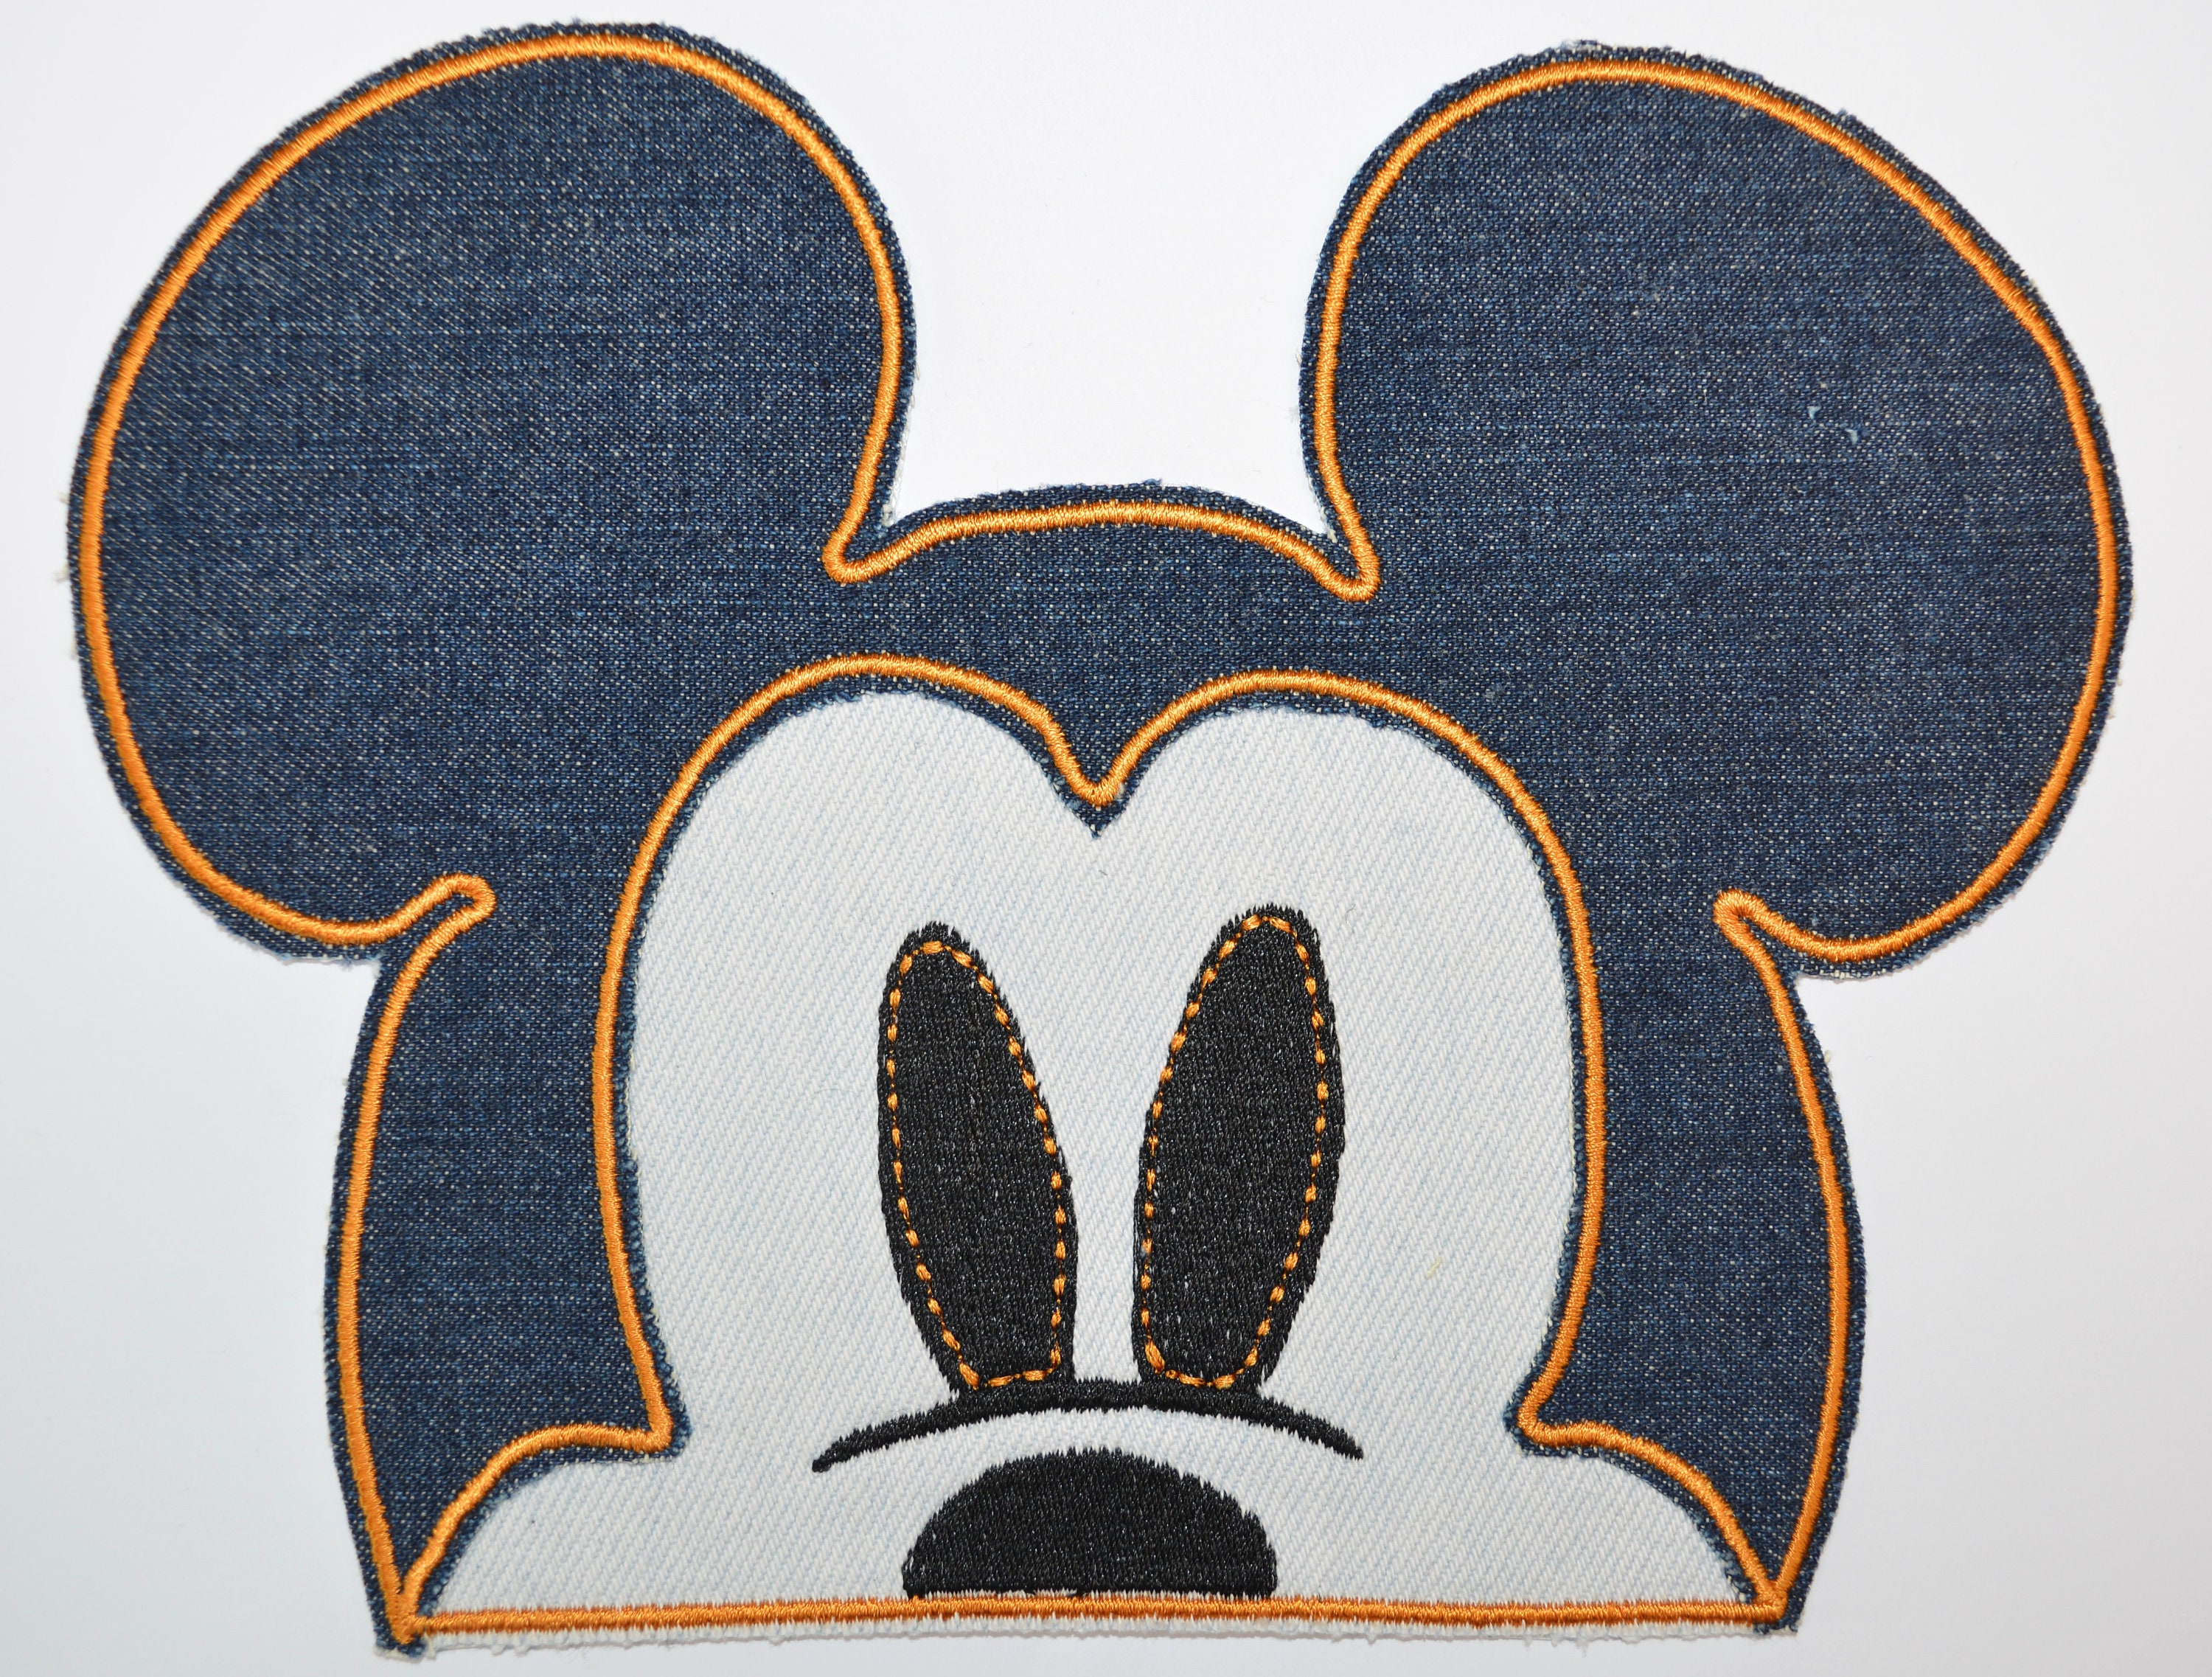 2X3 Mickey Mouse Embroidered IRON On PATCH / No Sew hat bag Patch Classic  Mickey classic pose hands behind back Disney Applique Badge